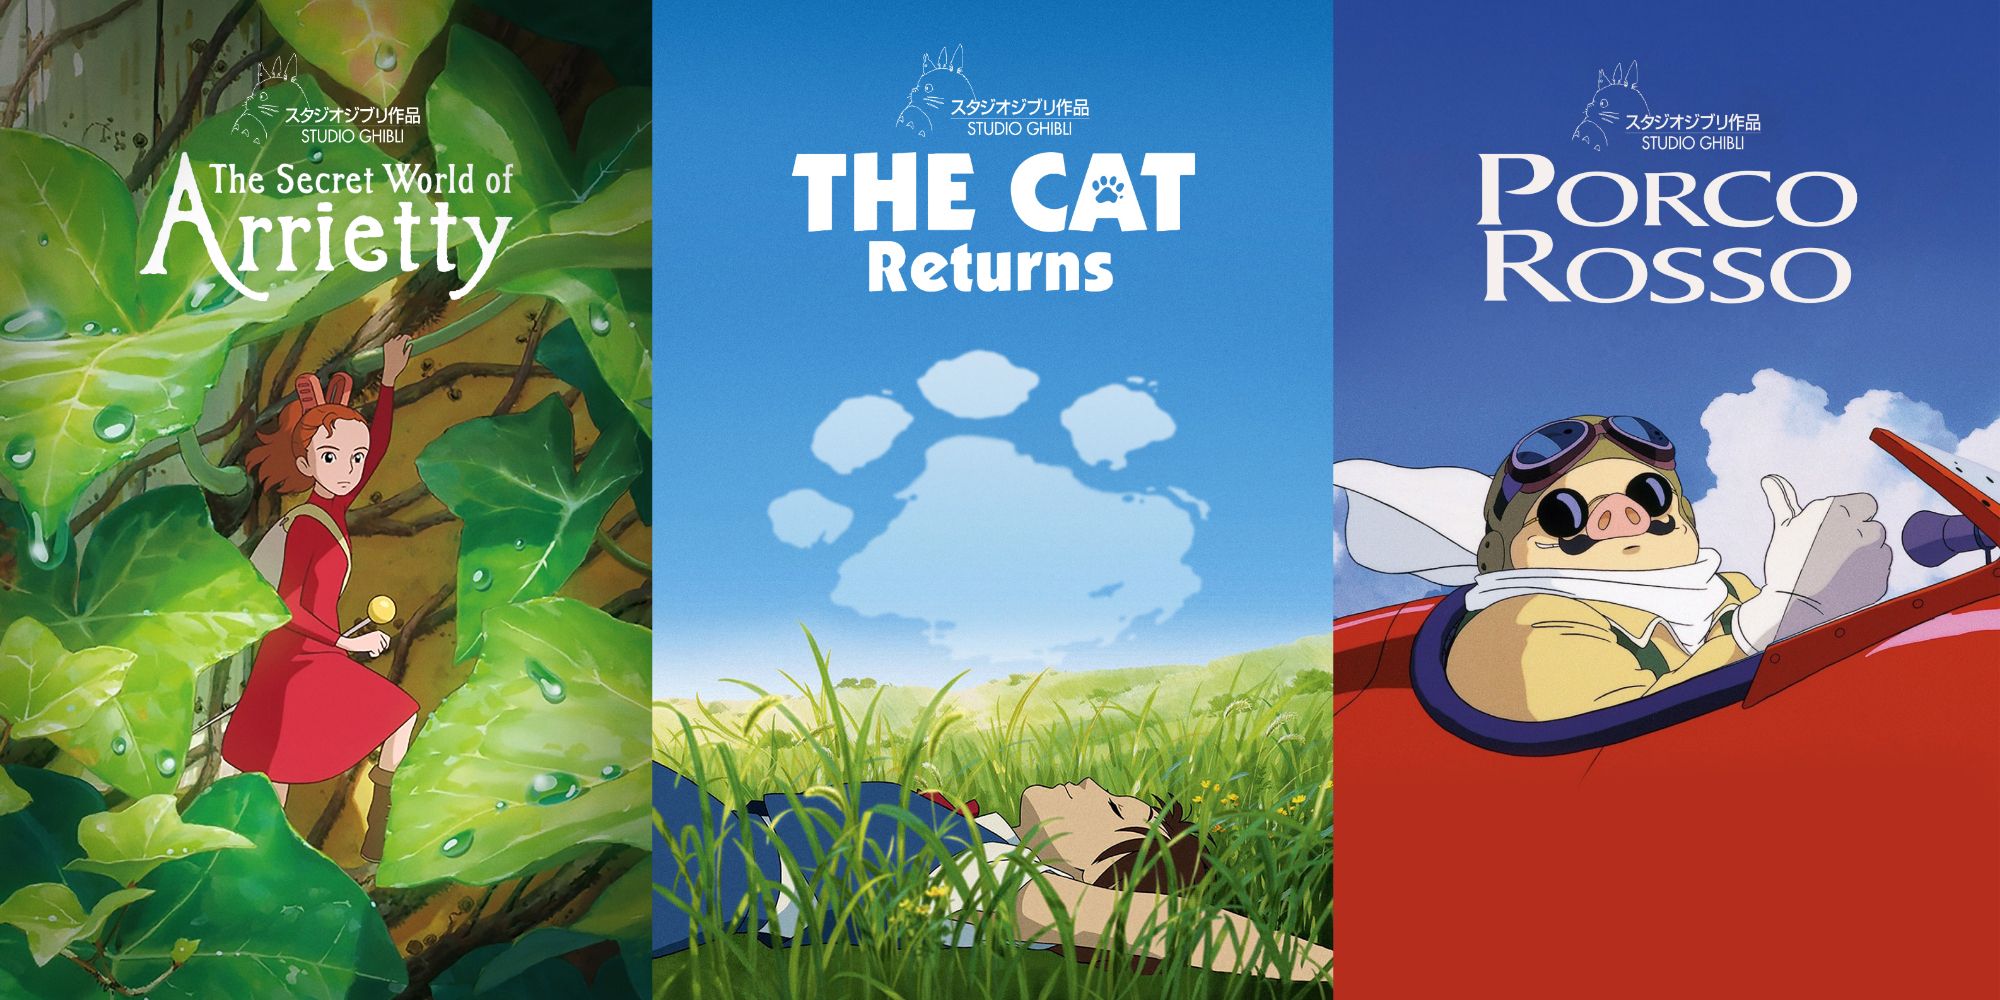 The Secret World of Arrietty, The Cat Returns and Porco Rosso Studio Ghibli movie posters